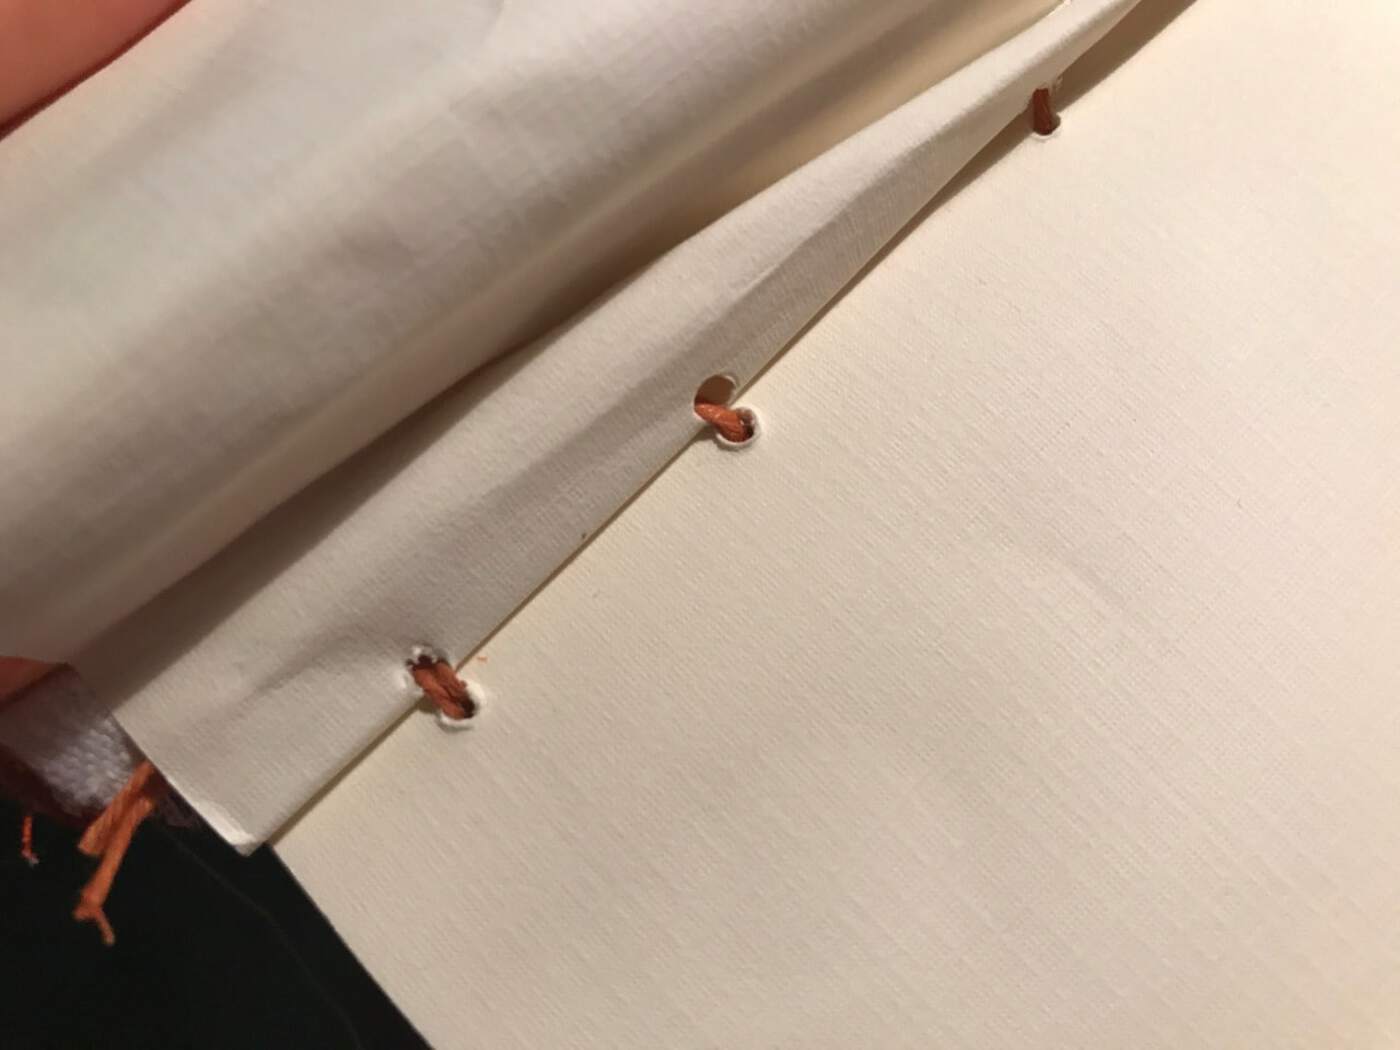 Pages threaded together